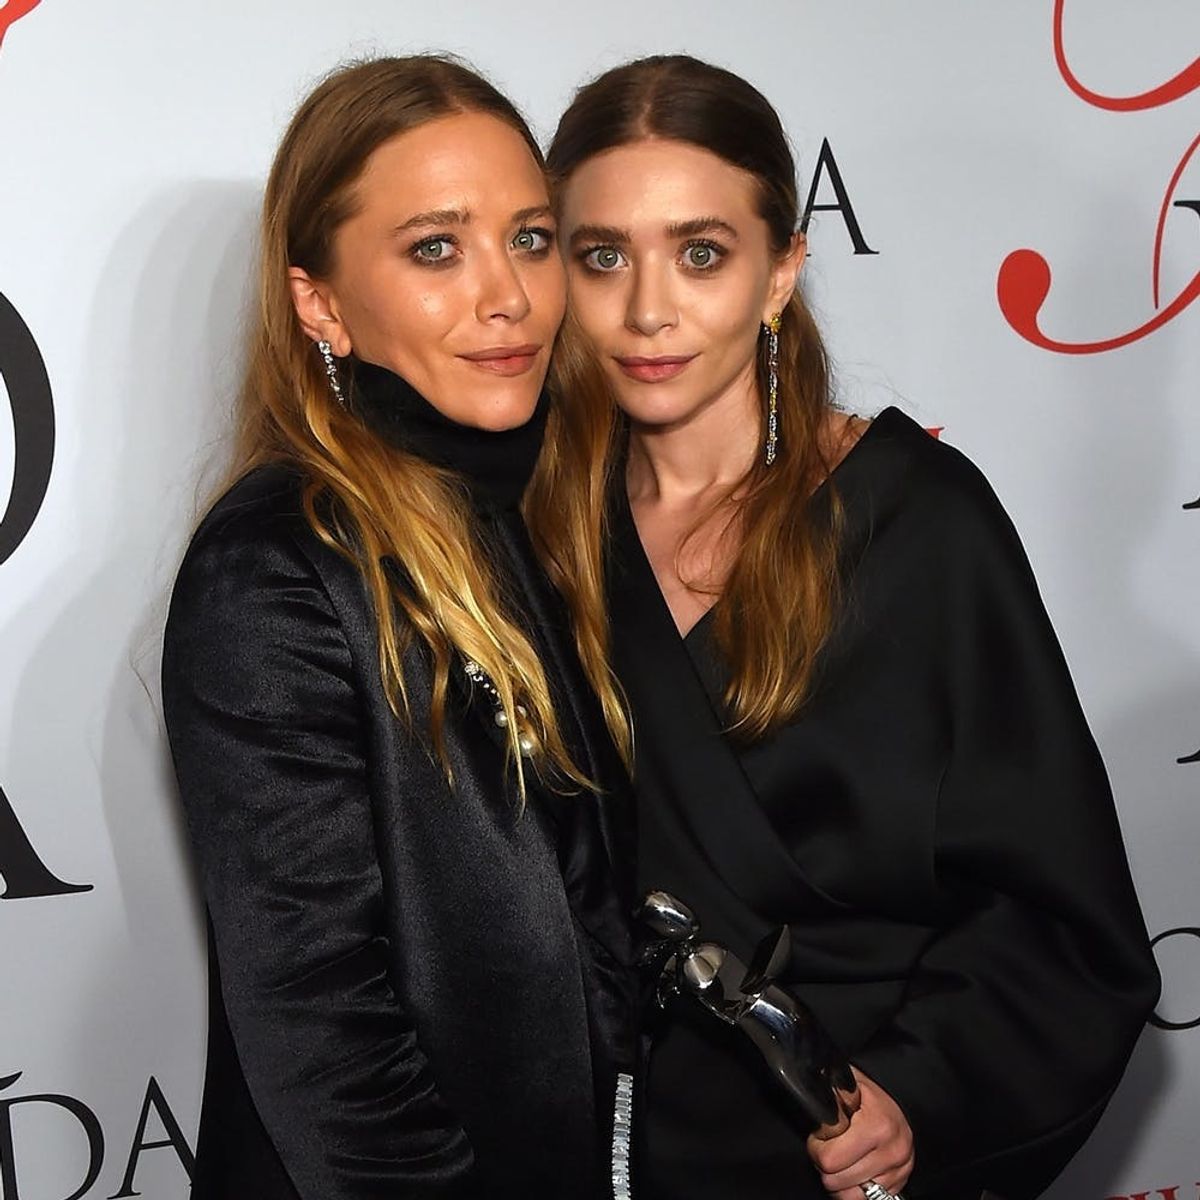 This Art Exhibit of the Olsen Twins Hiding from the Paparazzi Lives Up ...